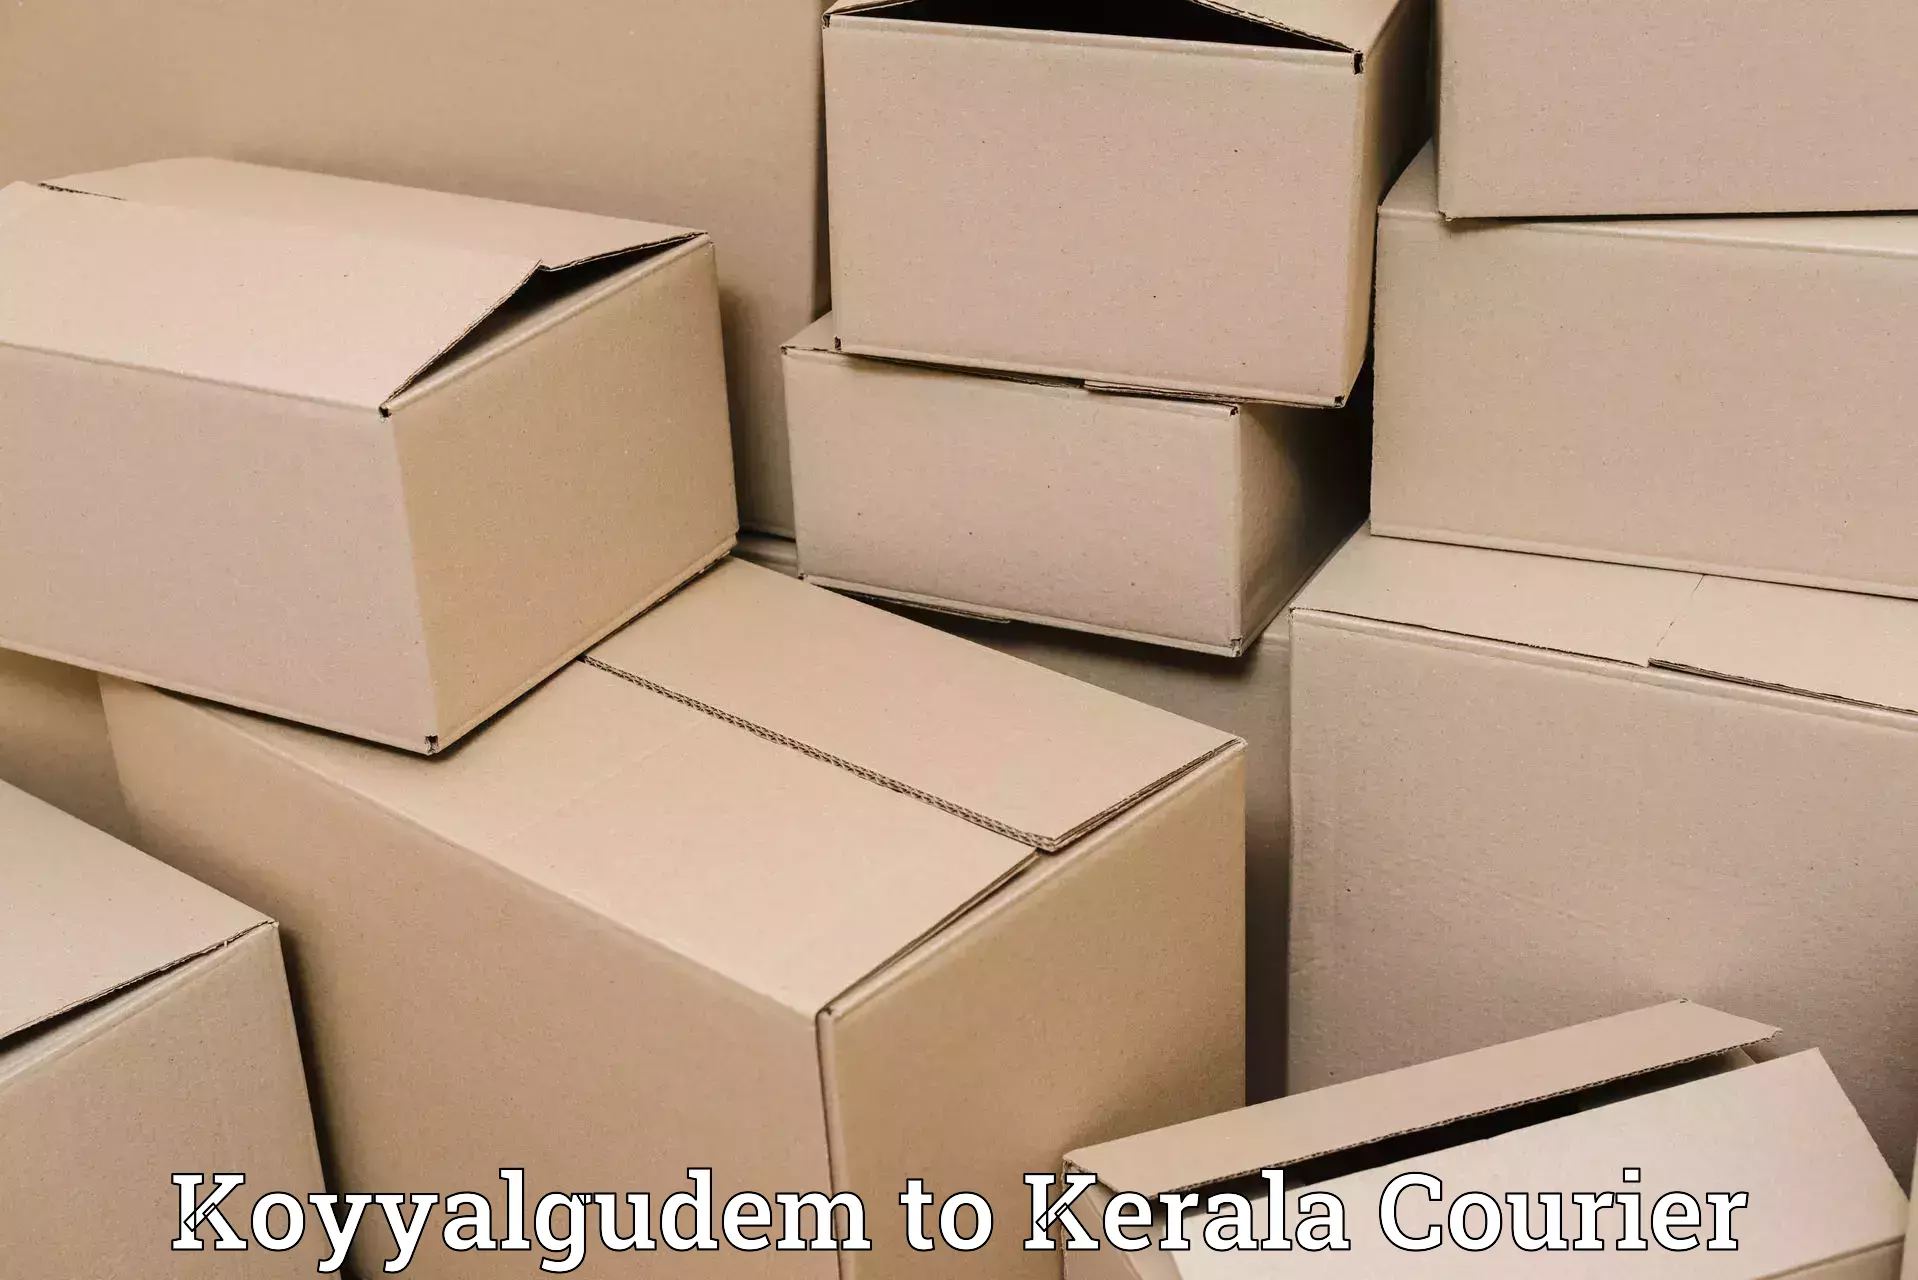 Flexible delivery schedules in Koyyalgudem to Kuthuparamba